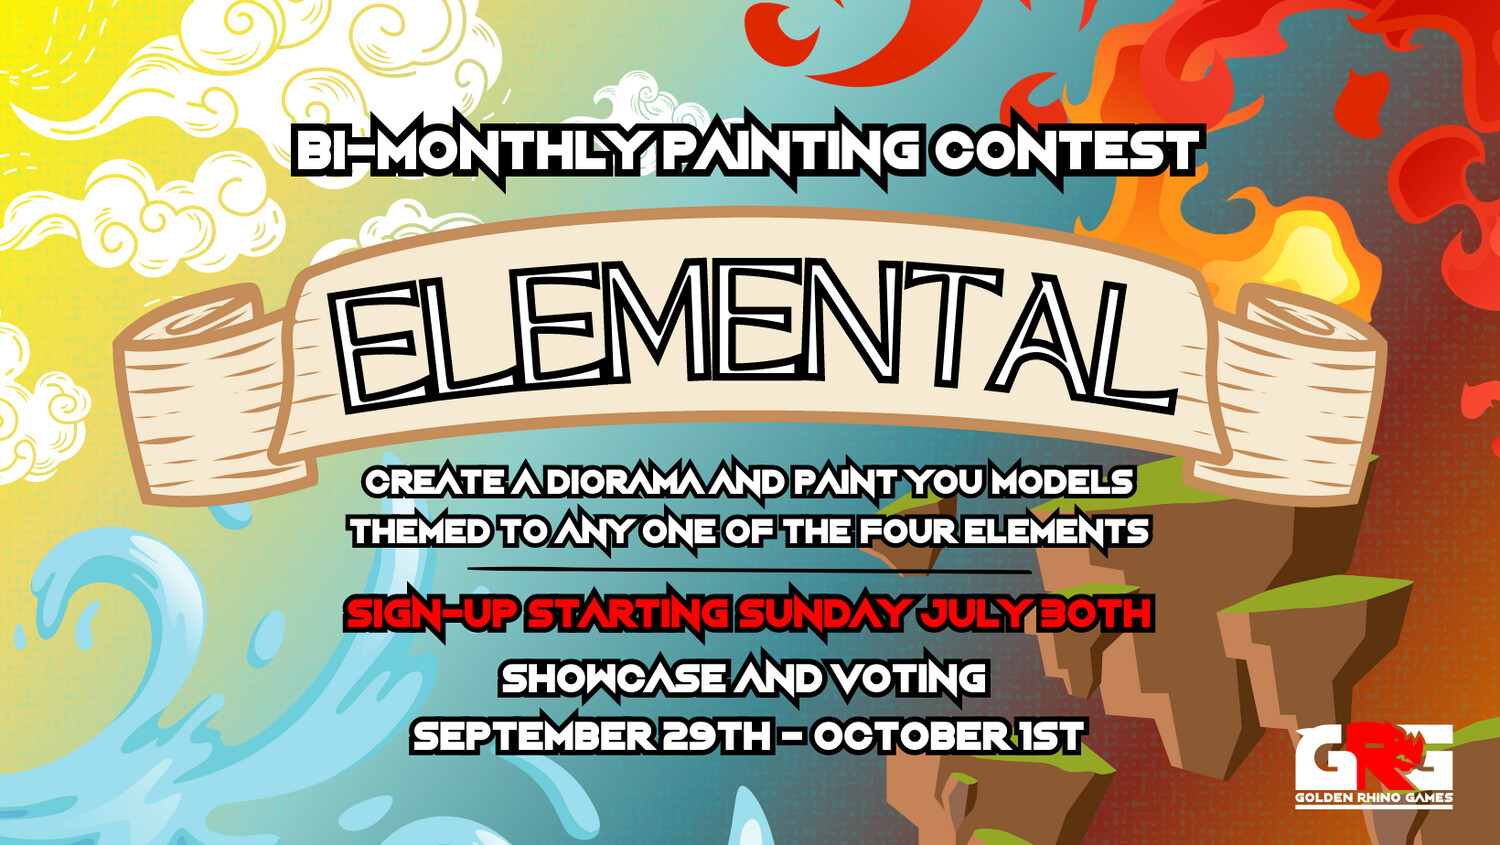 Bi-Monthly Painting Contest: Elemental